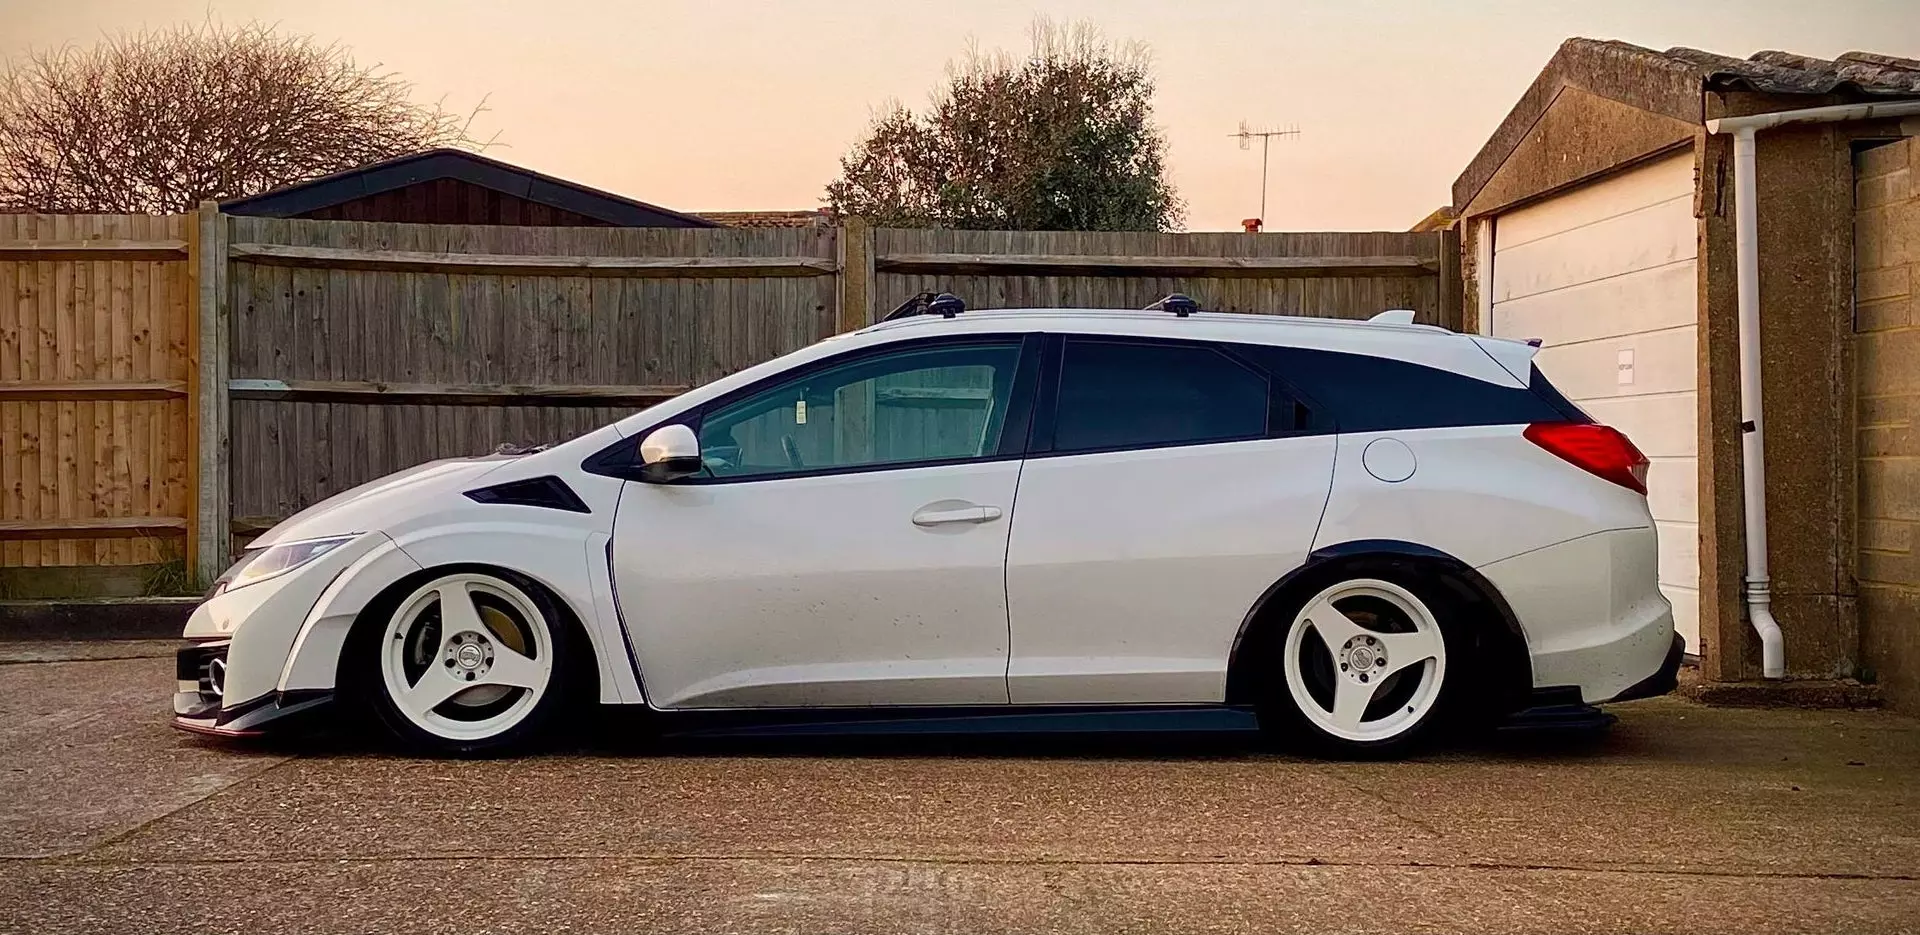 This 2015 Honda Civic Looks Like It Time-Travelled From 3015 | Autance